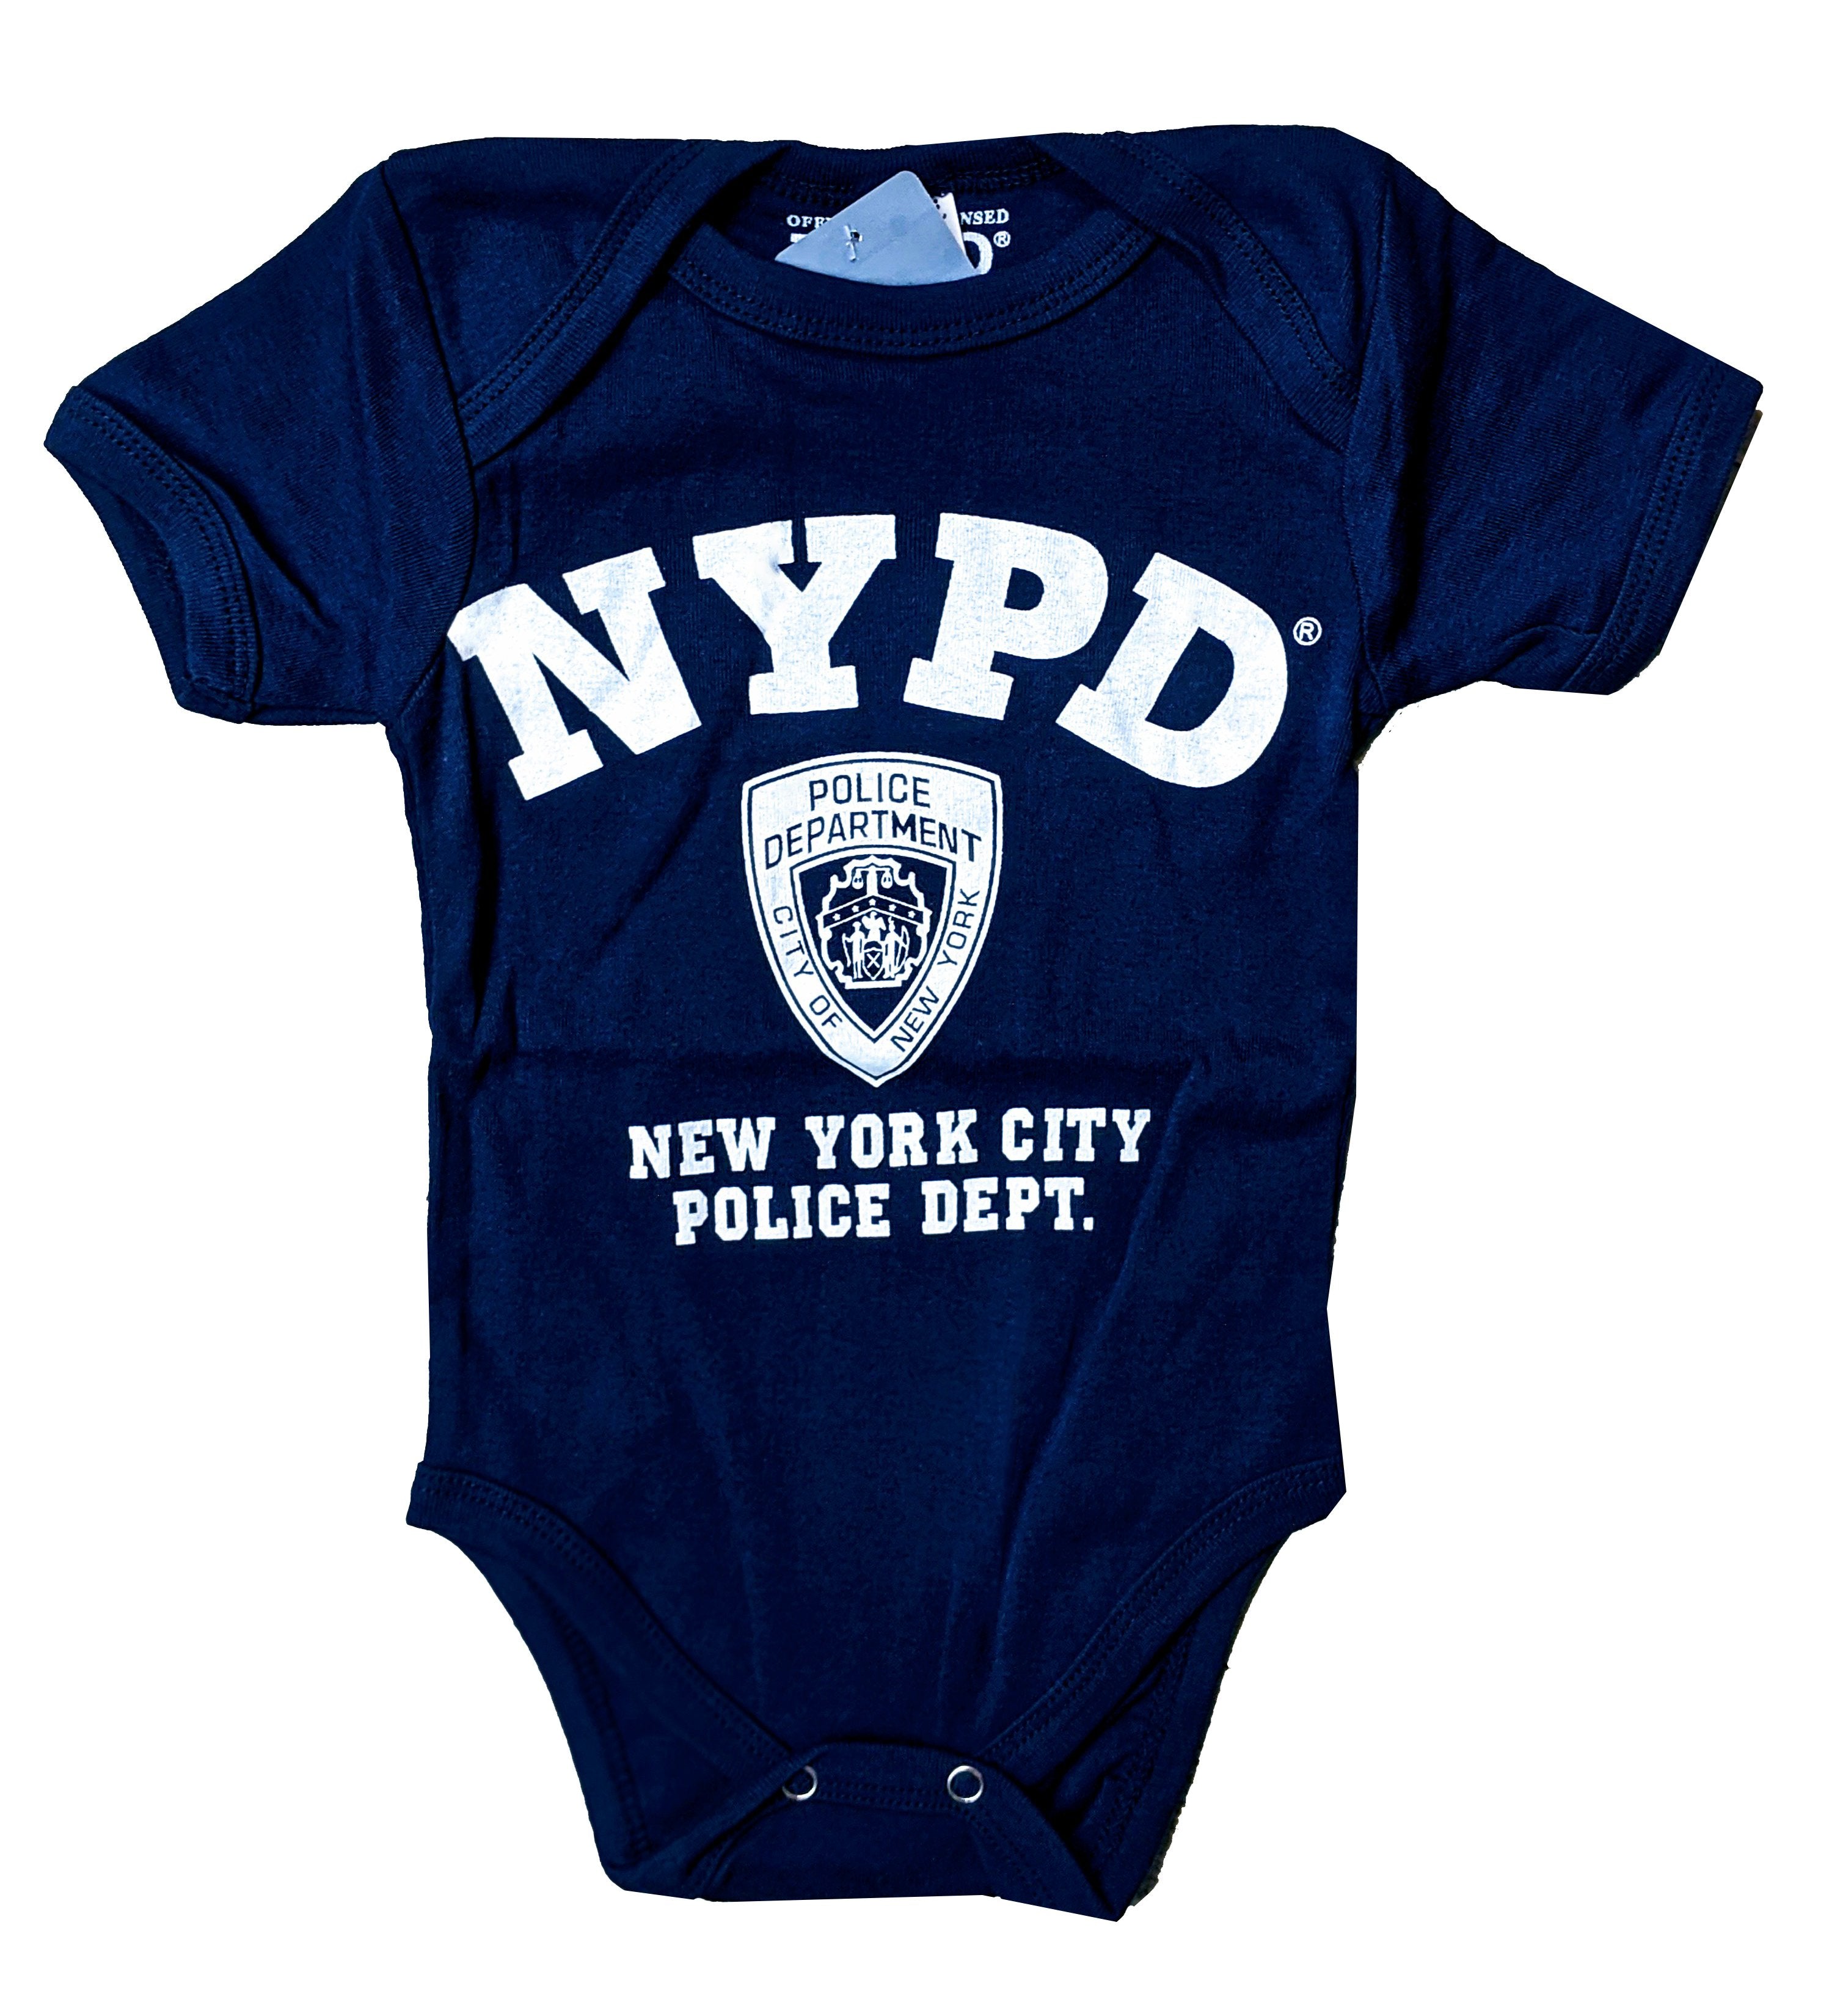 NYPD Baby Bodysuit Officially Licensed Product (Navy Blue & White)